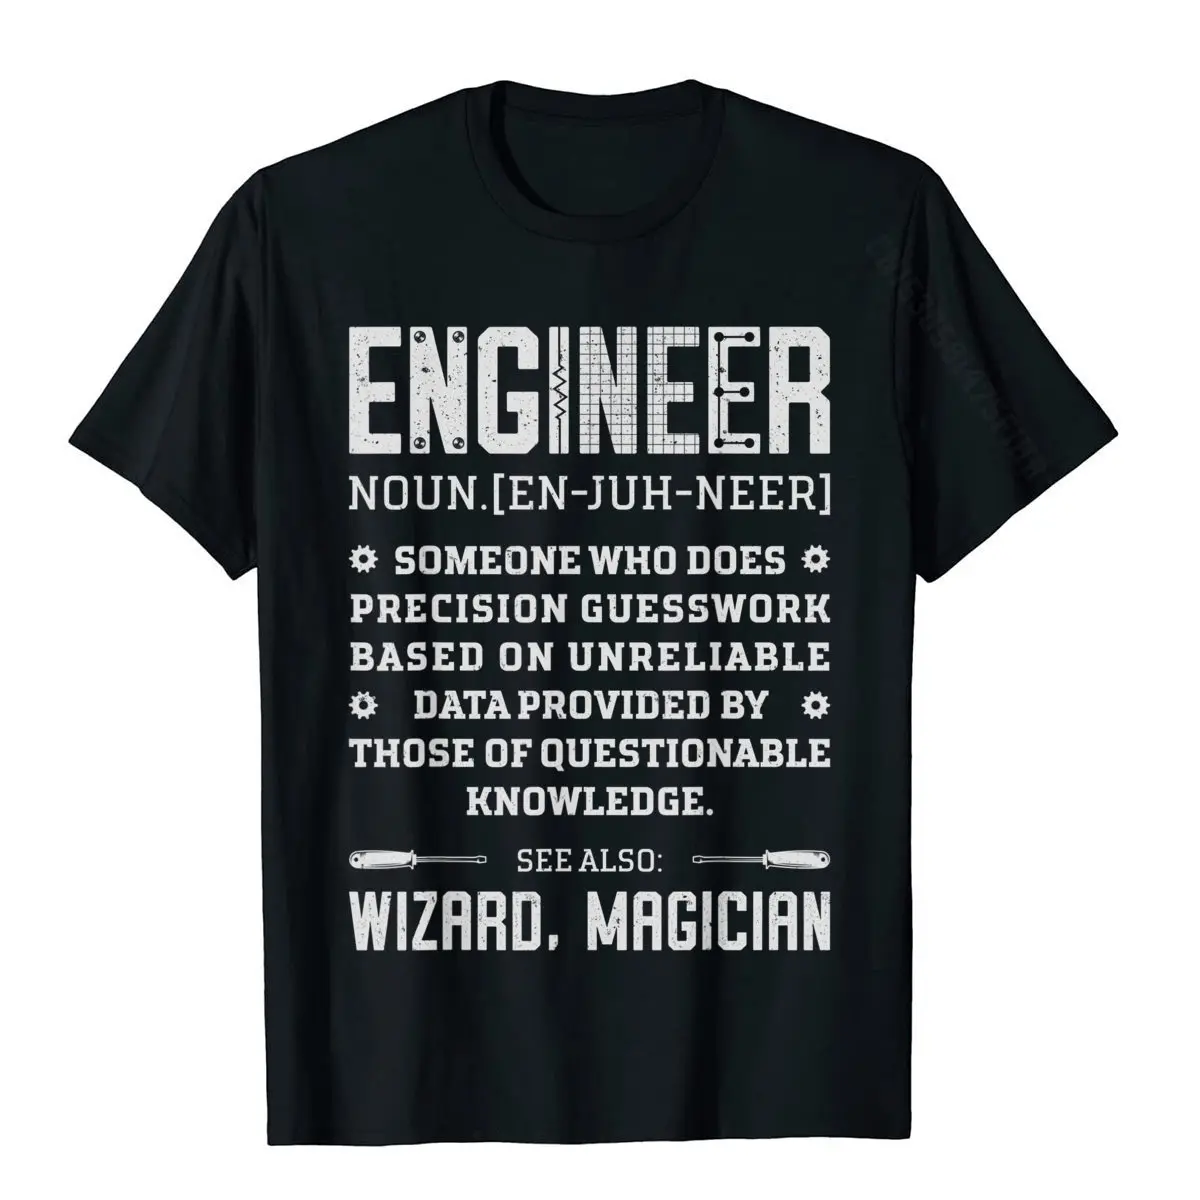 Engineer Definition Funny Noun Engineering Dictionary Term T-Shirt Funny Tops Shirt For Men Cotton Tshirts Funny Hot Sale